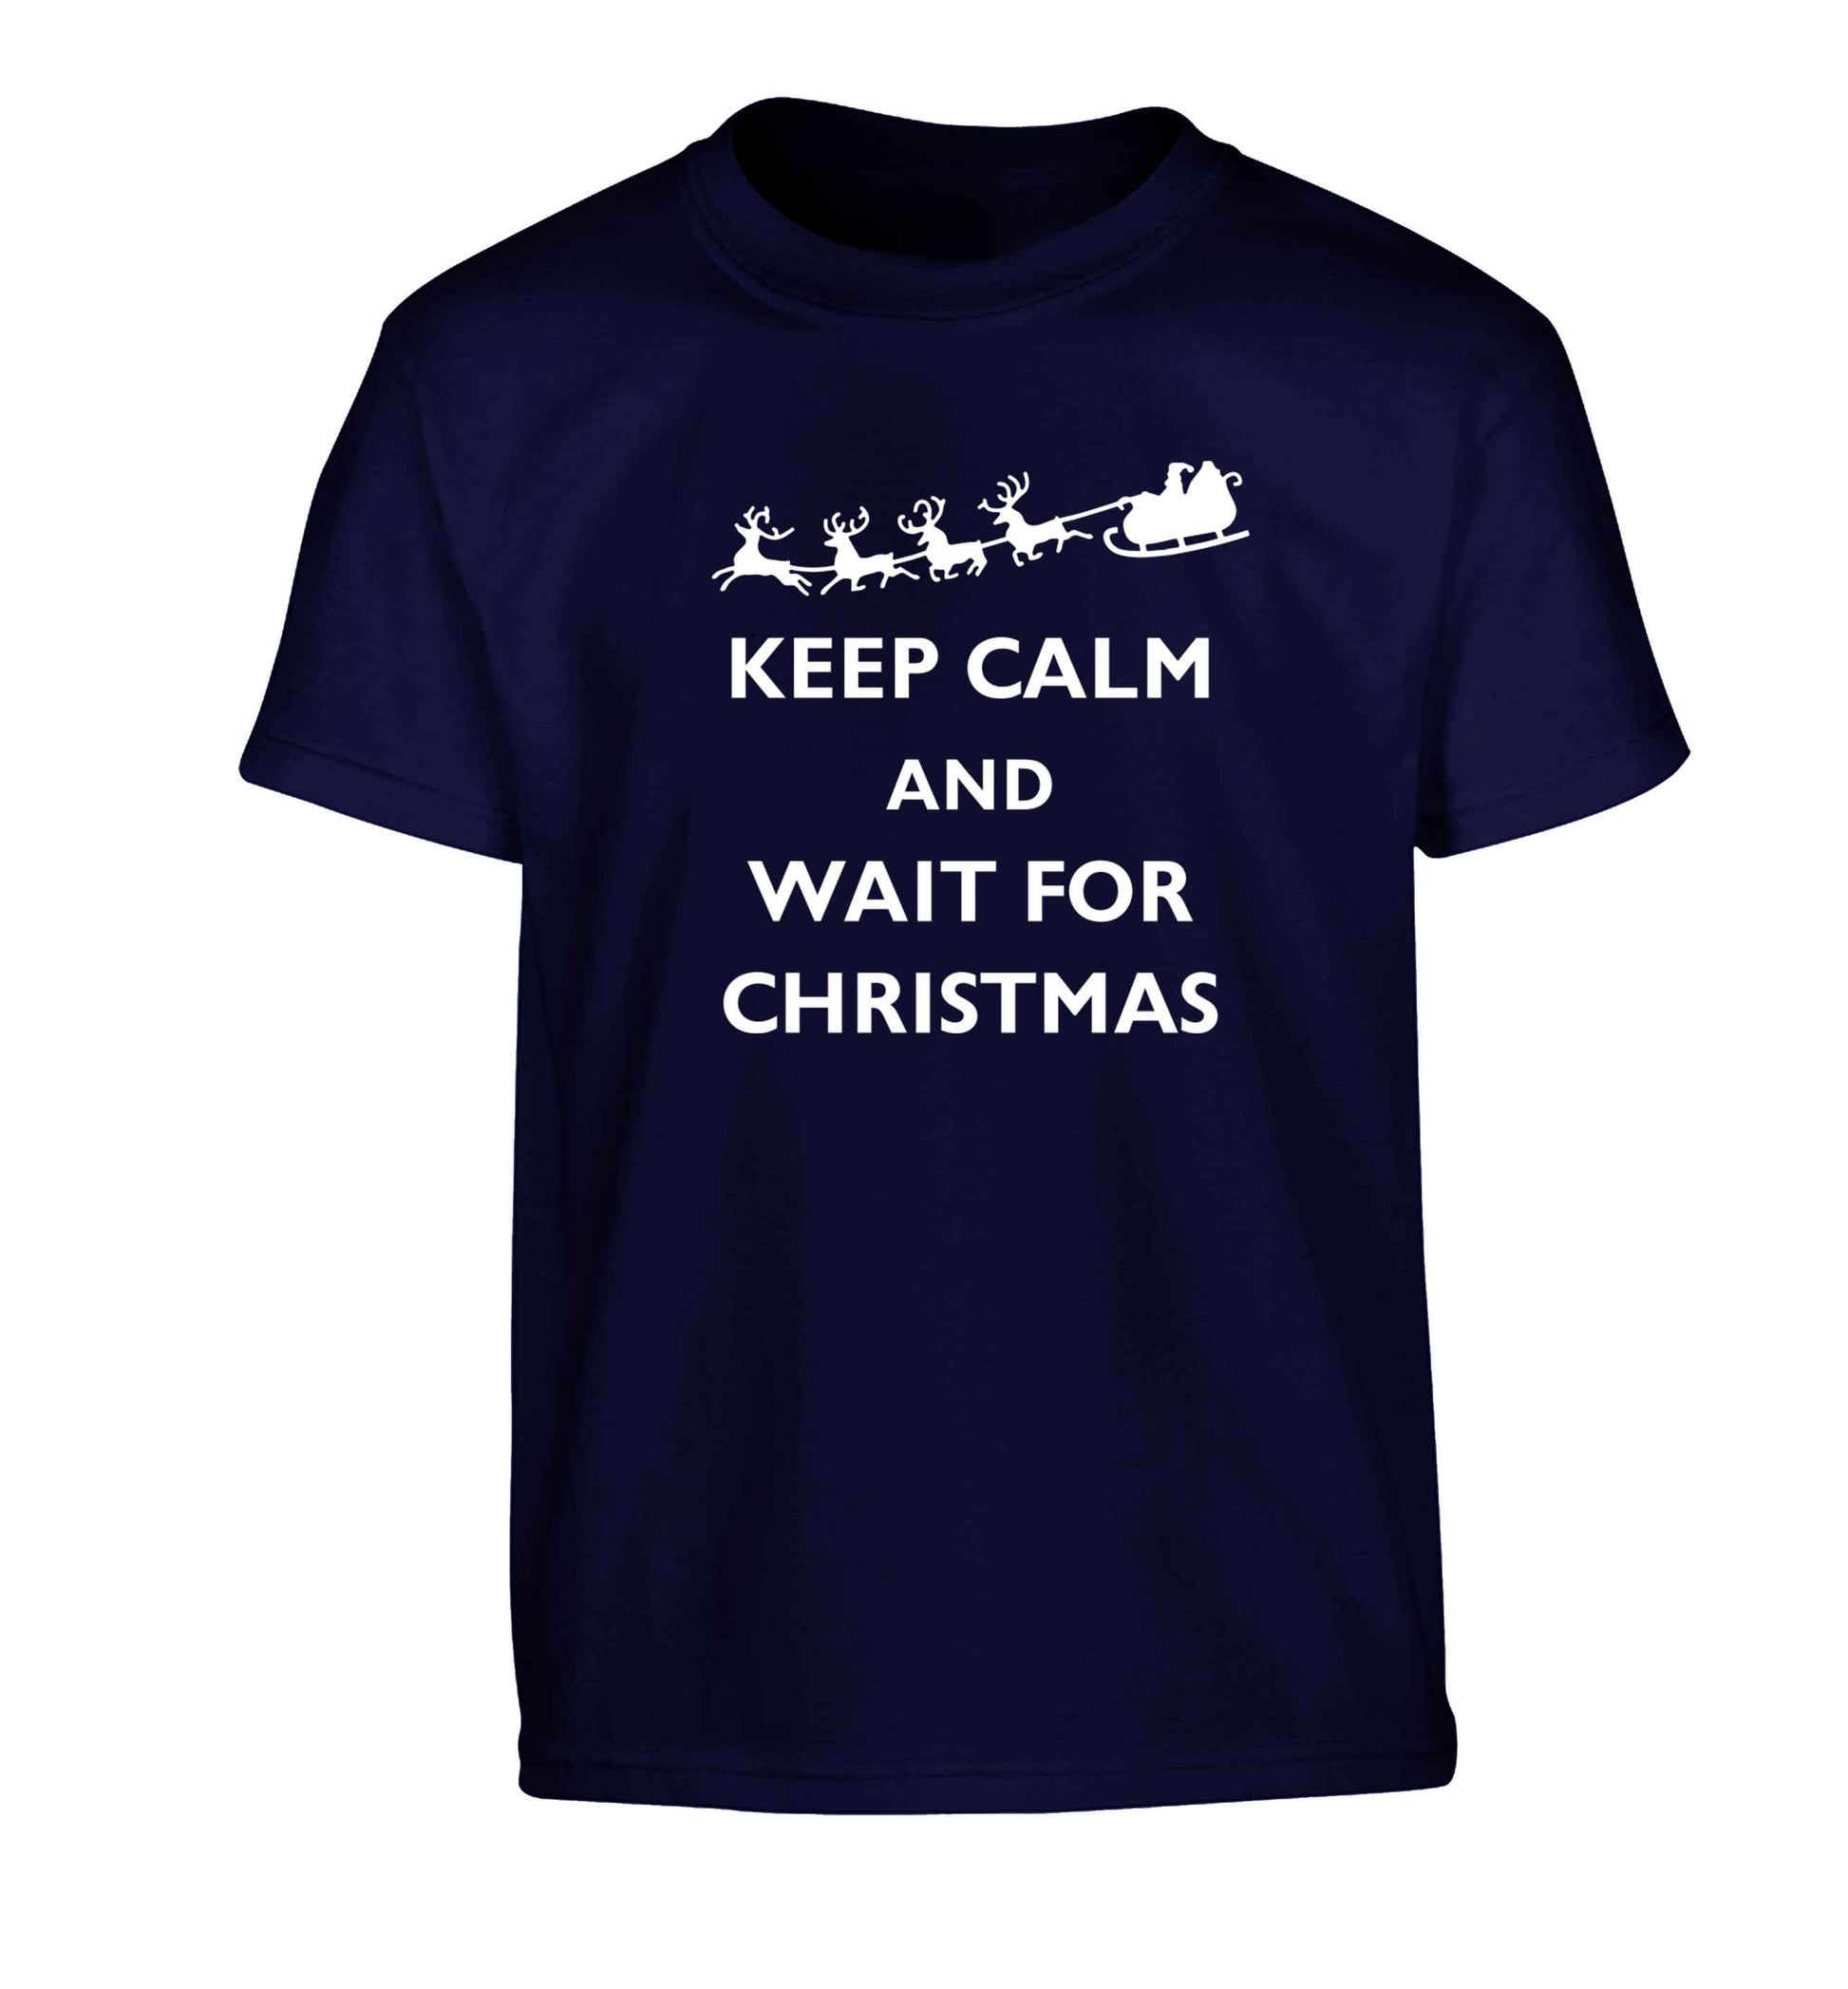 Keep calm and wait for Christmas Children's navy Tshirt 12-13 Years